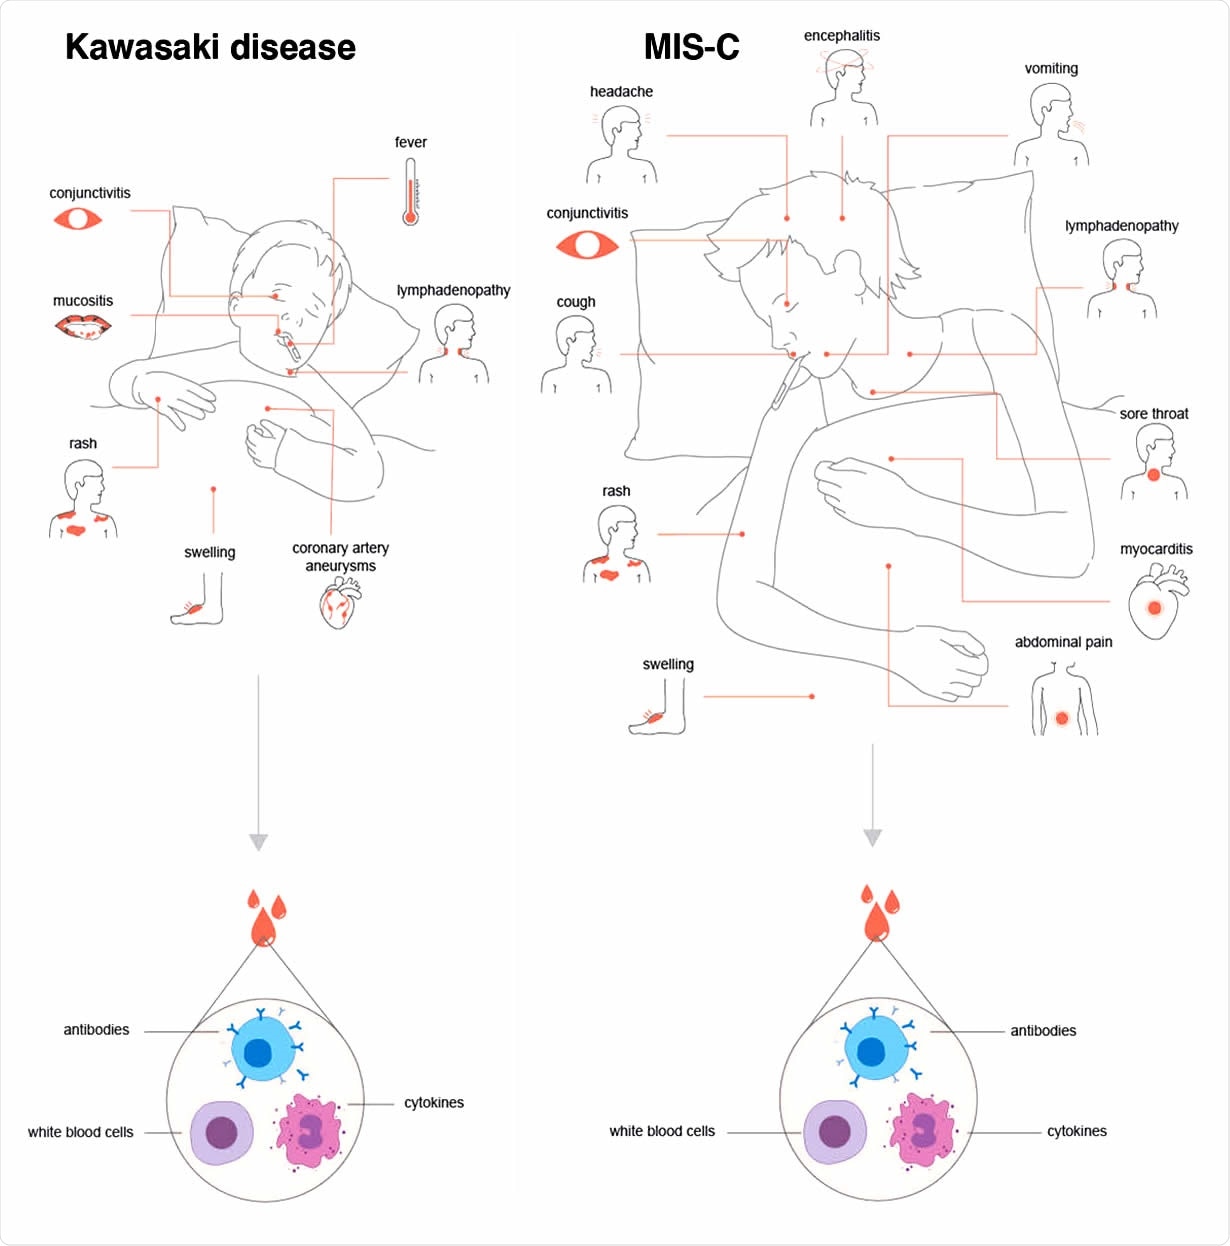 MIS-C has overlapping features with Kawasaki disease